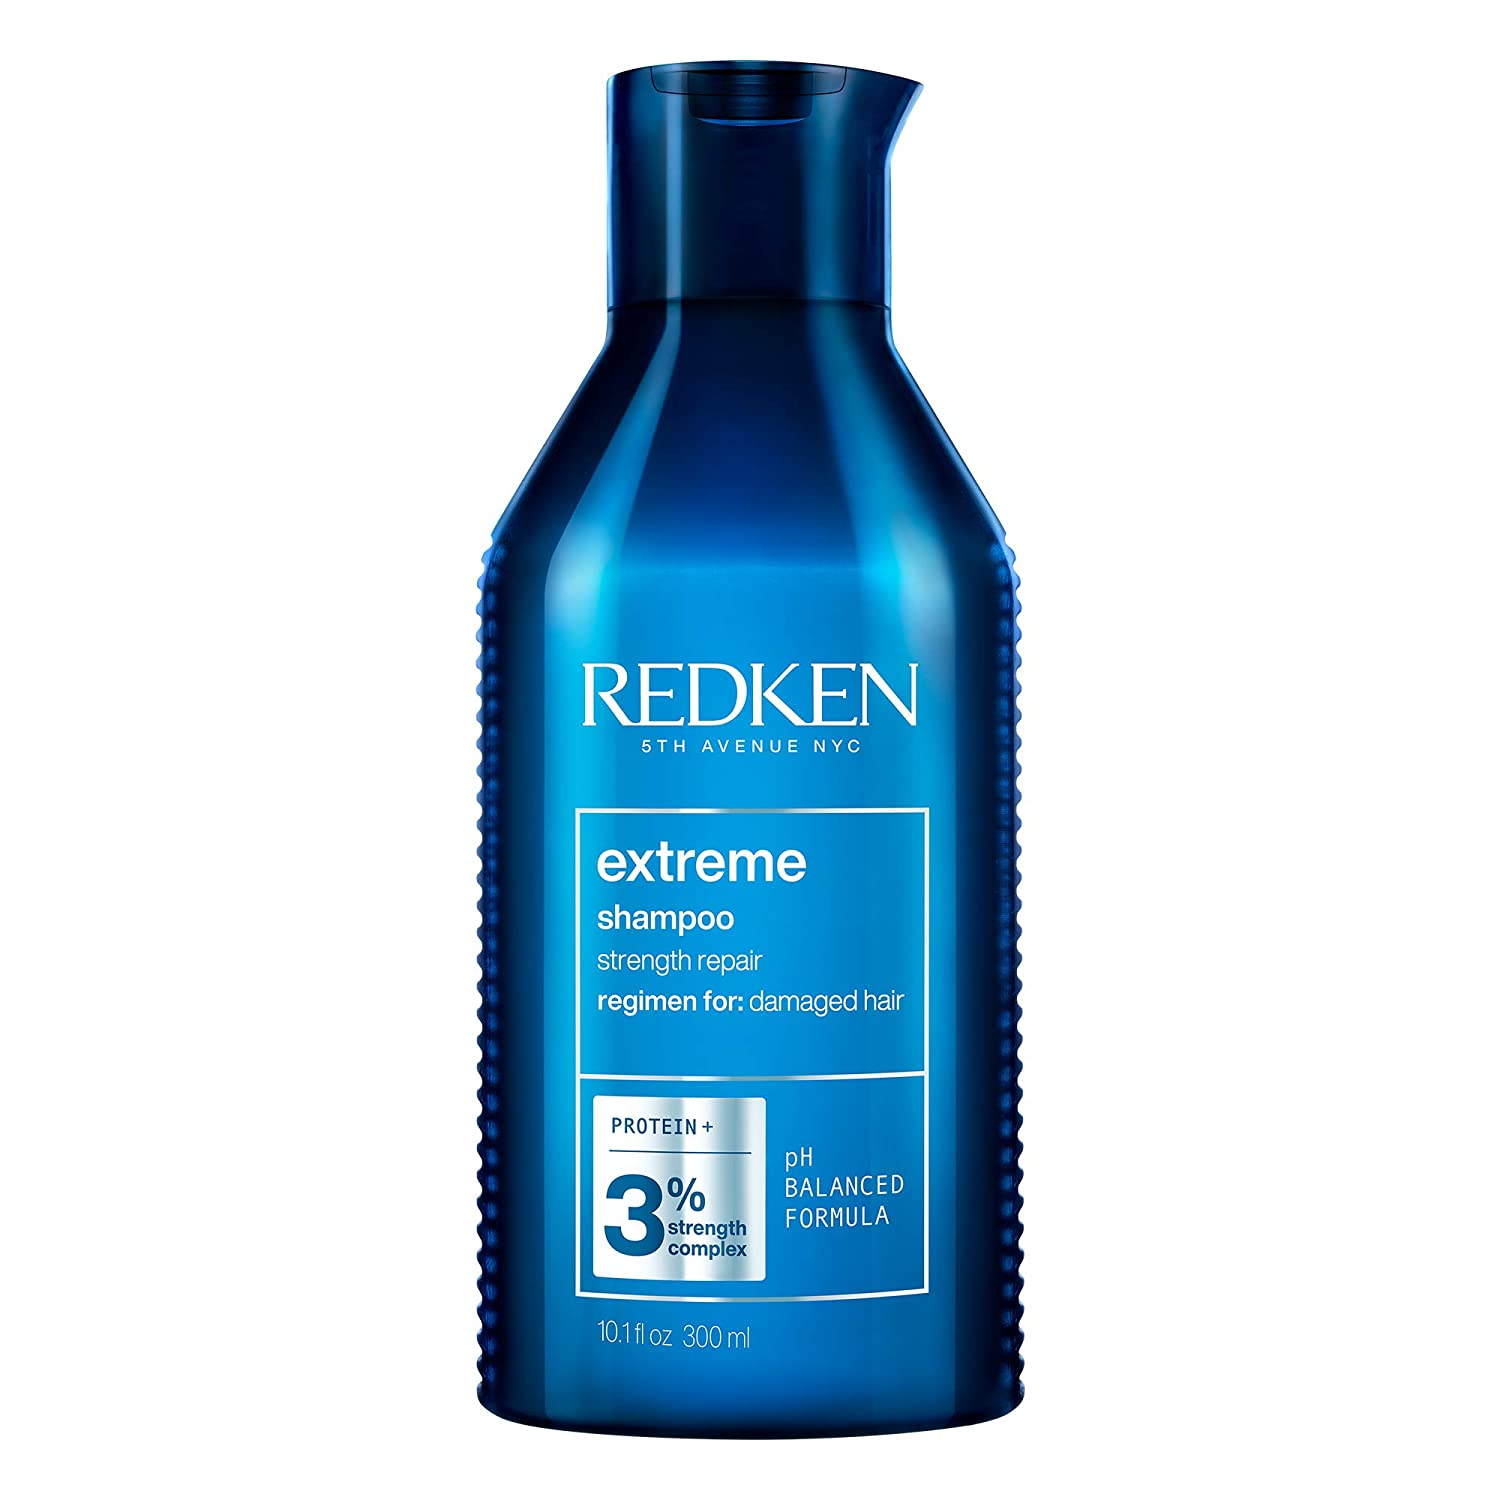 Redken Extreme Shampoo, Nourishing Shampoo for Damaged Hair, Deep Cleansing Shampoo with Ceramides, Cleans Gently & Strengthens Tips, Anti-Hair Breakage Shampoo for Damaged Hair & Tips, color ‎no